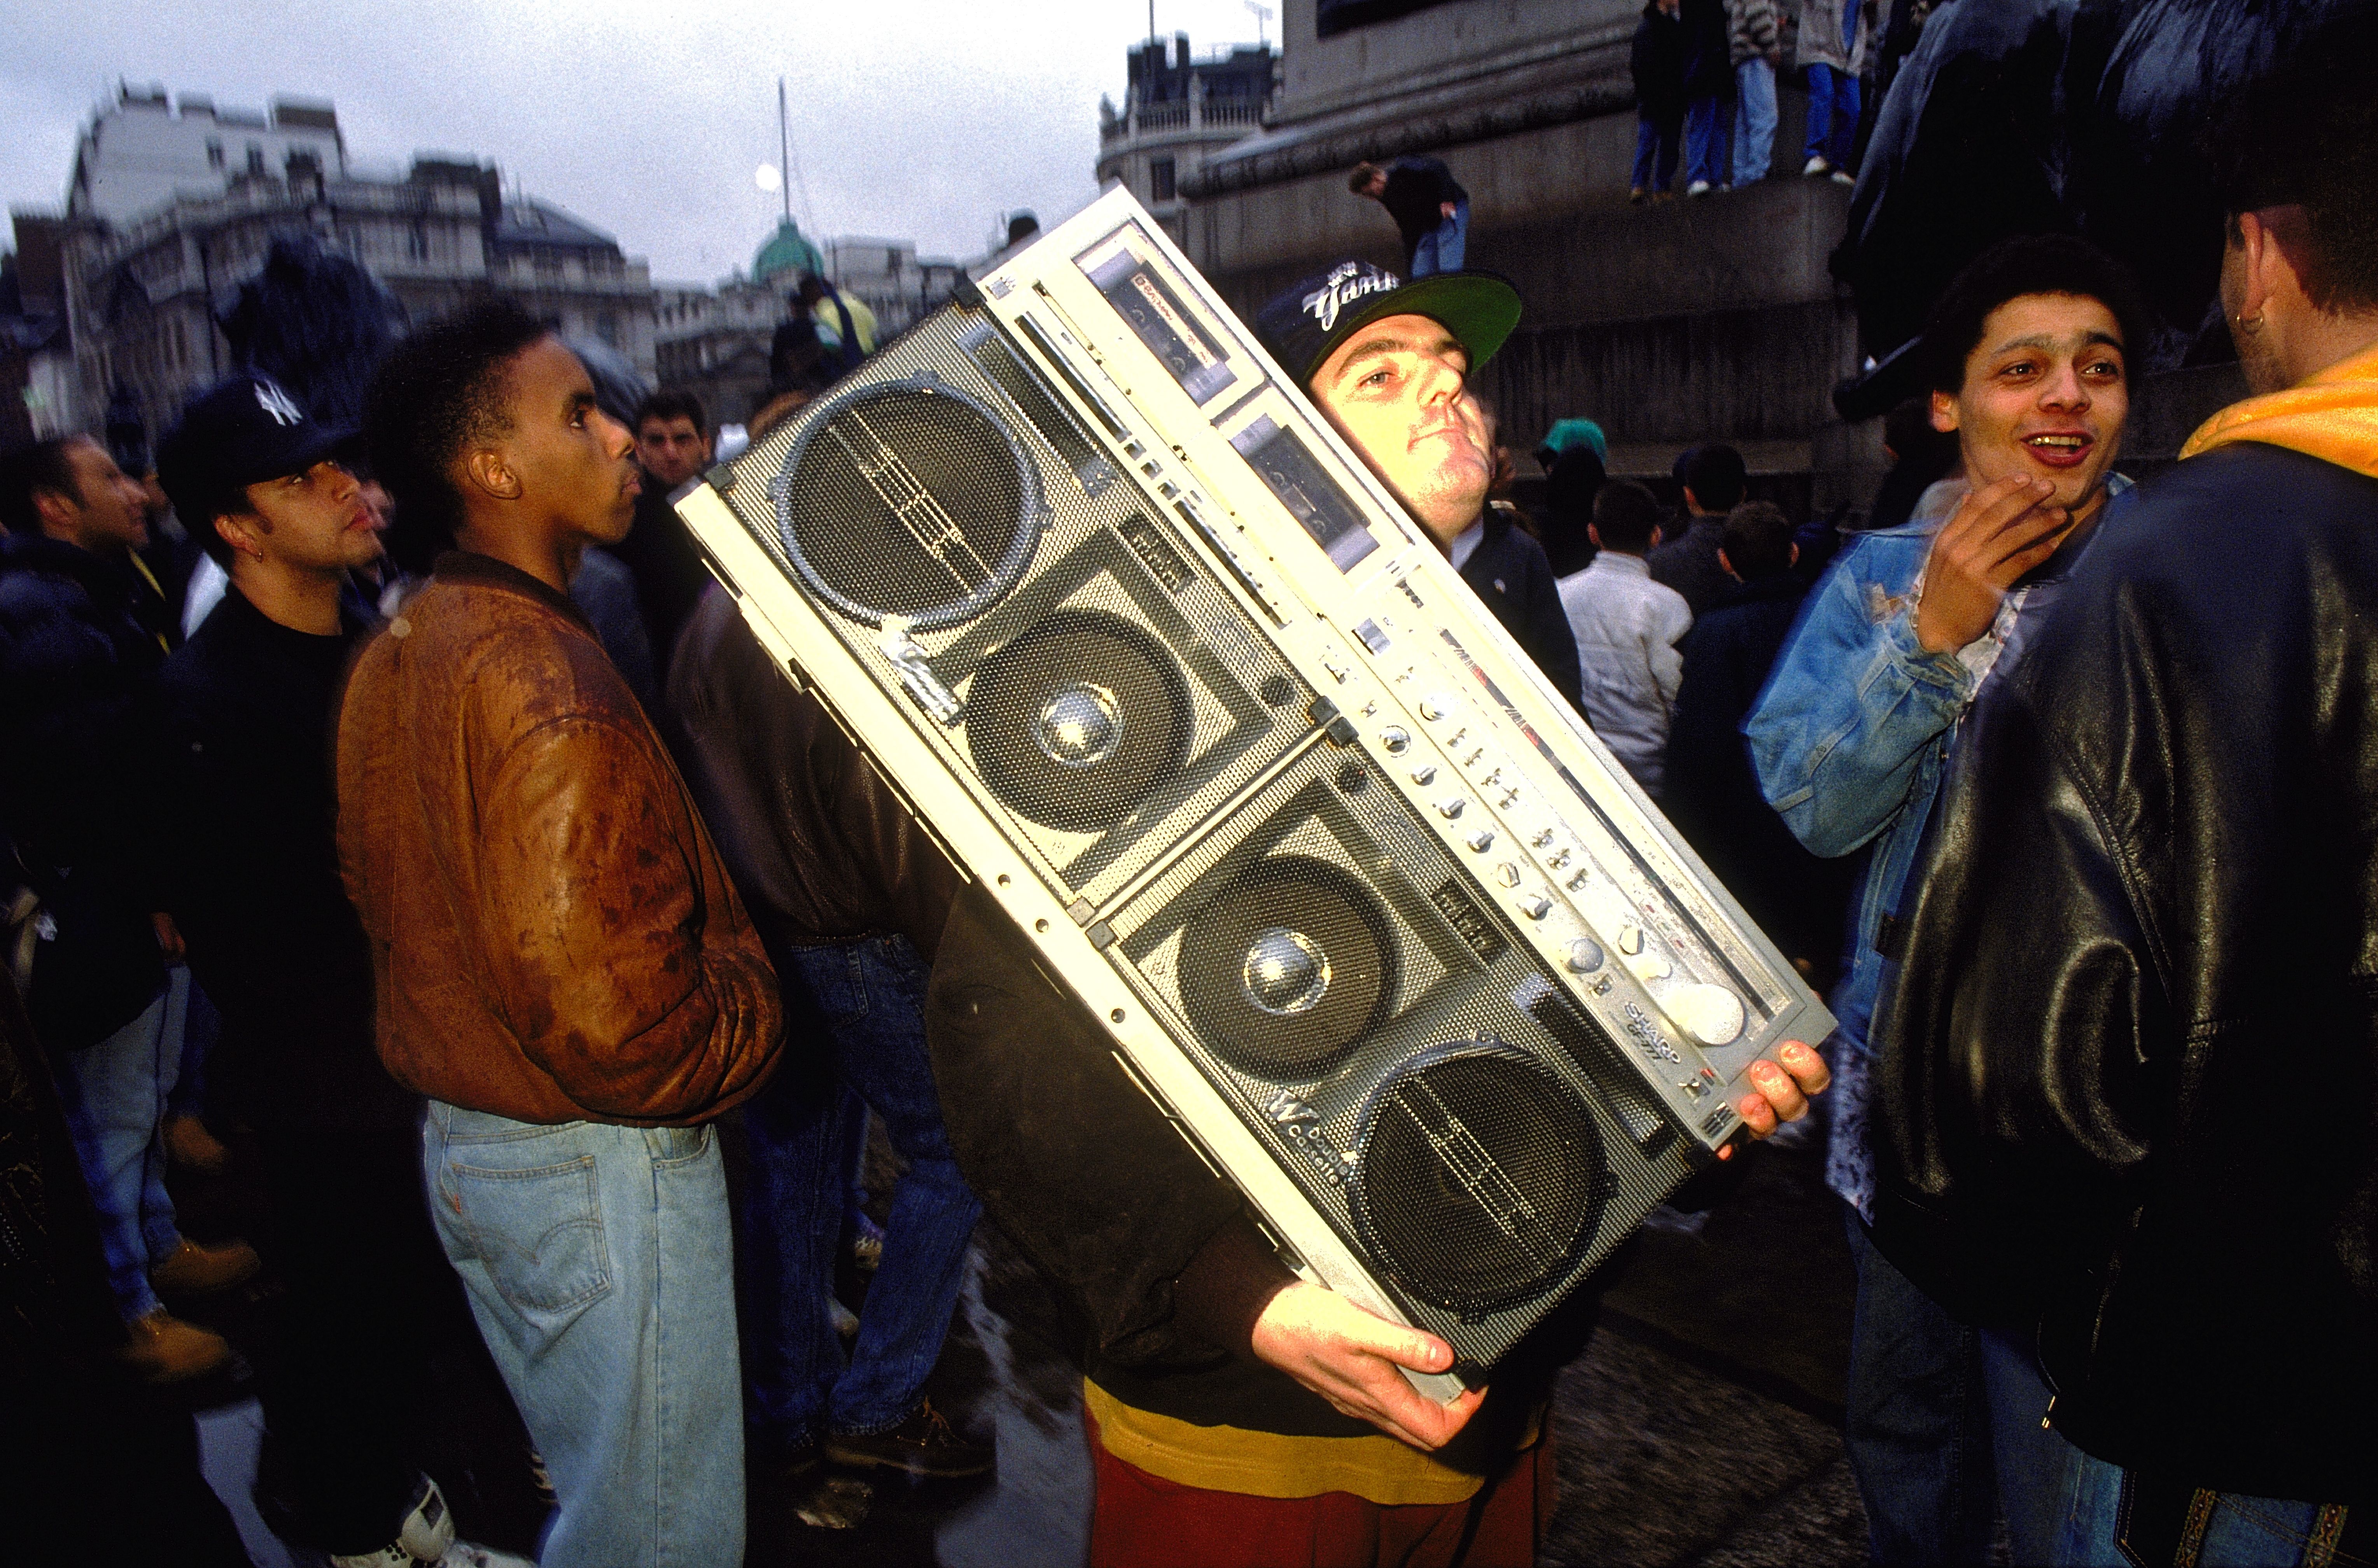 Man carrying boombox